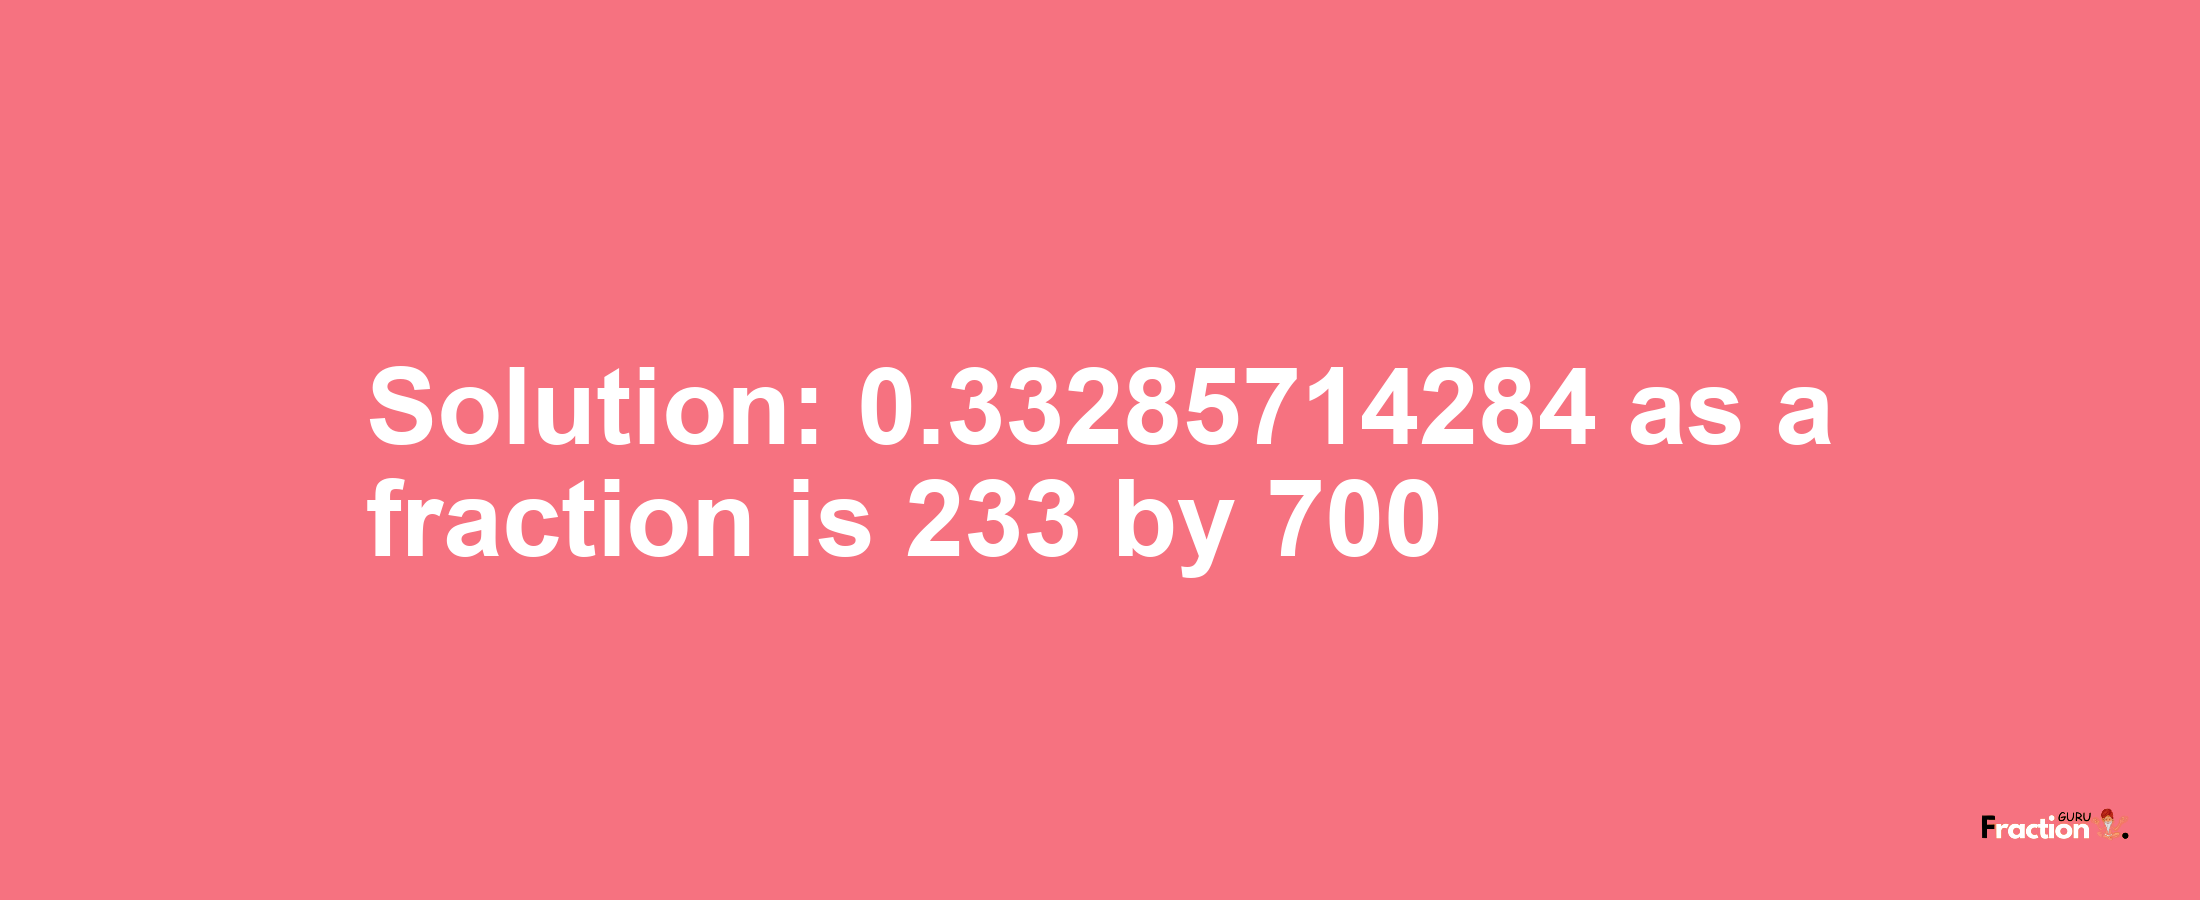 Solution:0.33285714284 as a fraction is 233/700